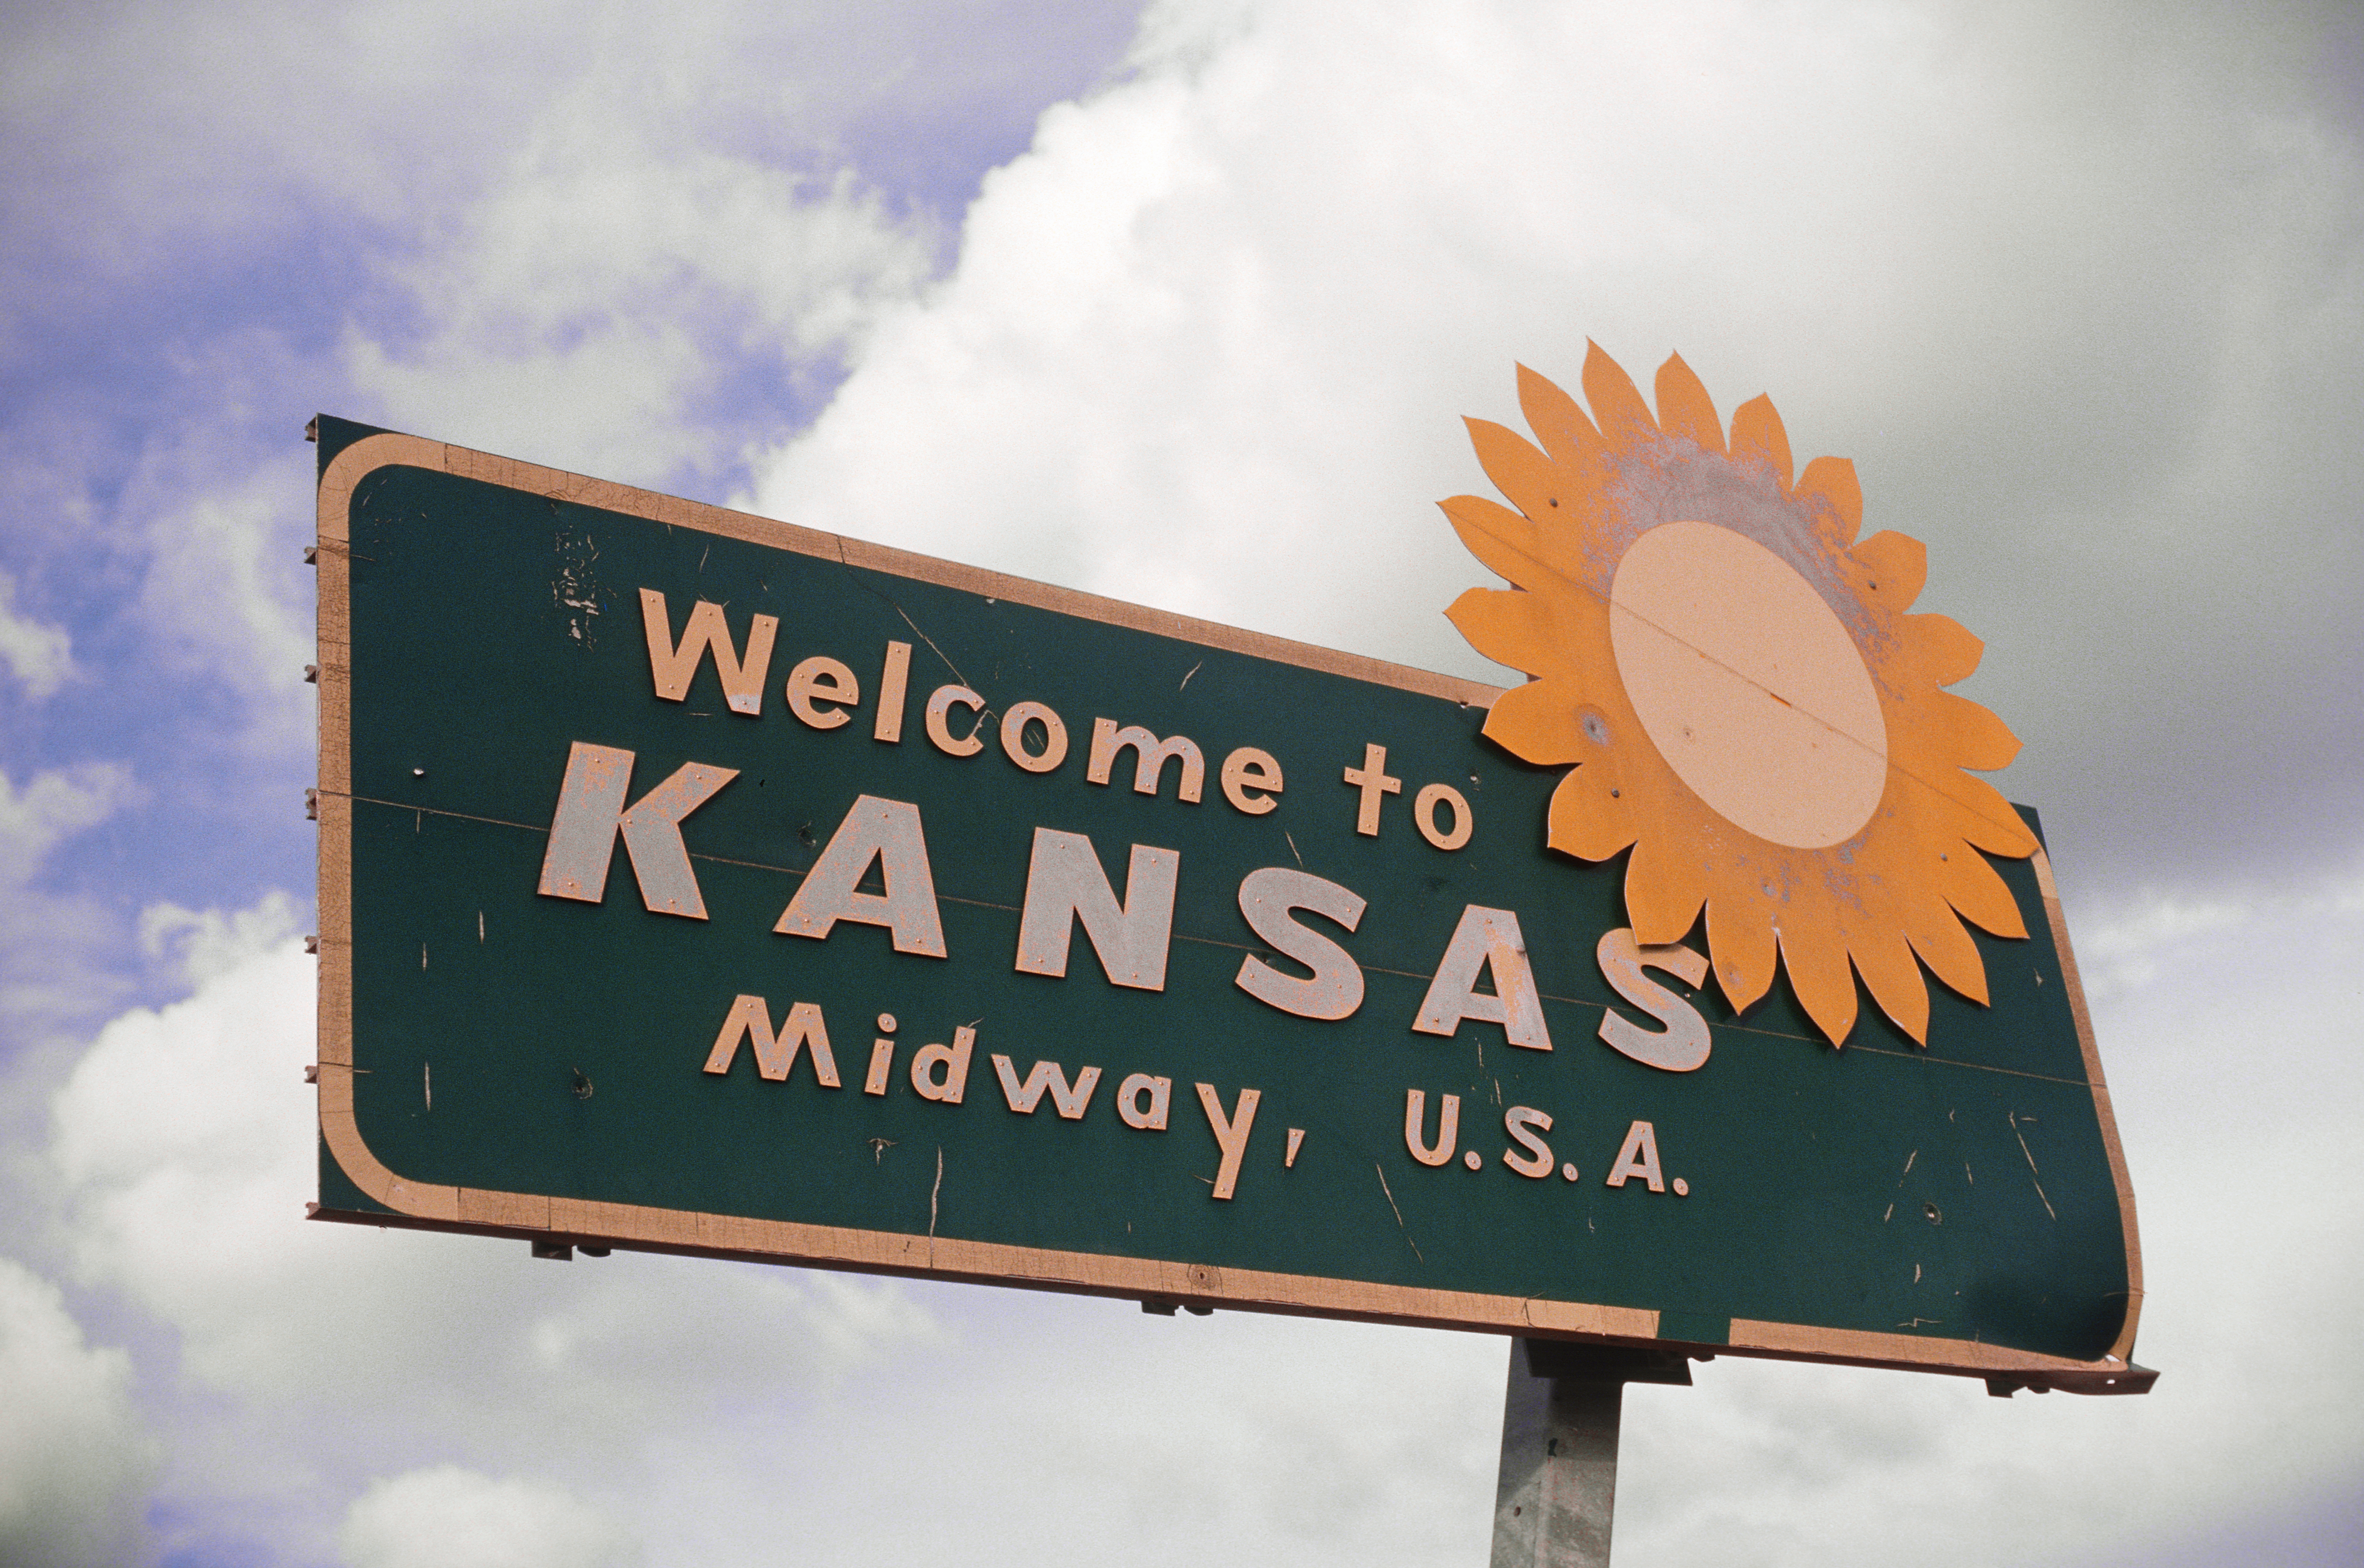 The Debate Over Pension Debt and Government Spending in Kansas